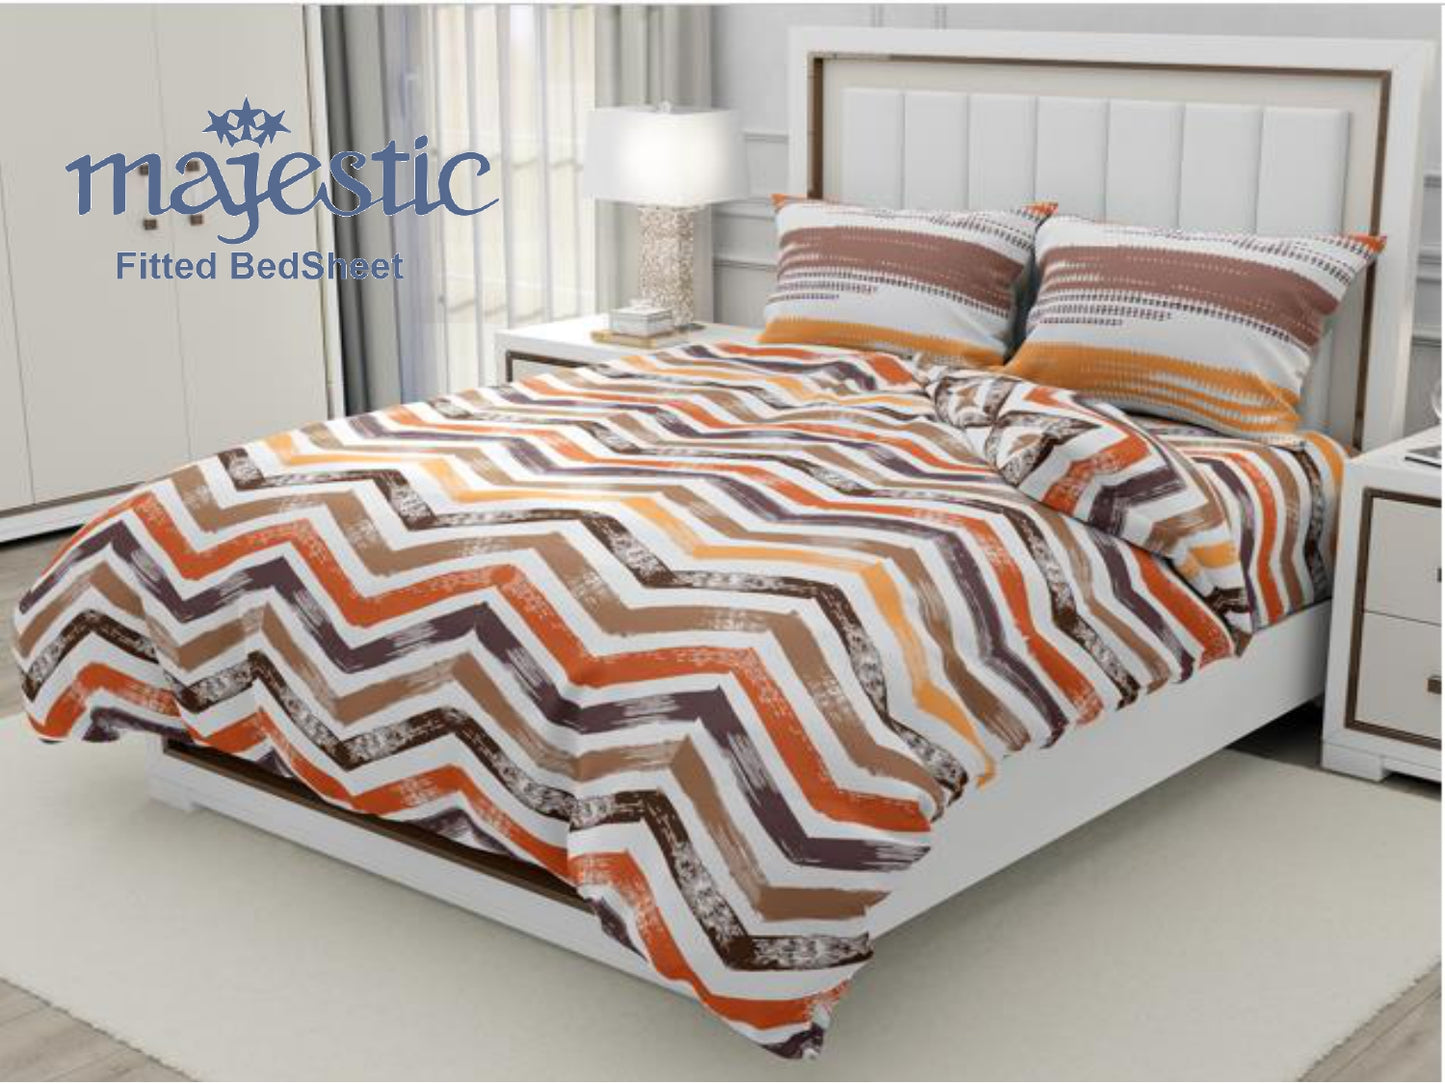 Signature King Fitted Bedsheet Collection-Majestic D 5